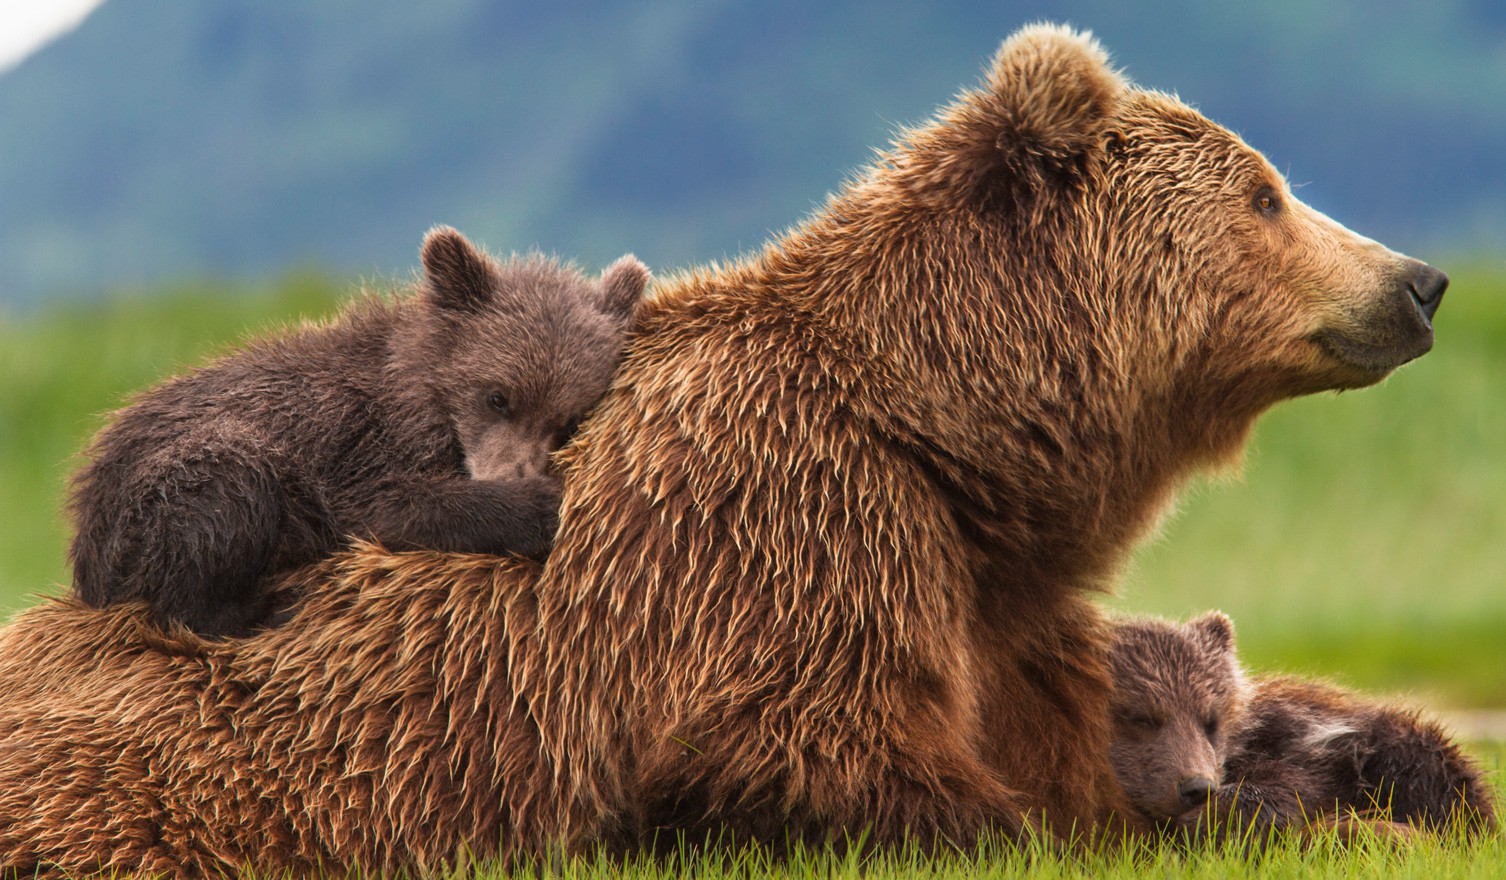 Sky, Amber and Scout from Disneynature's Bears (2014)